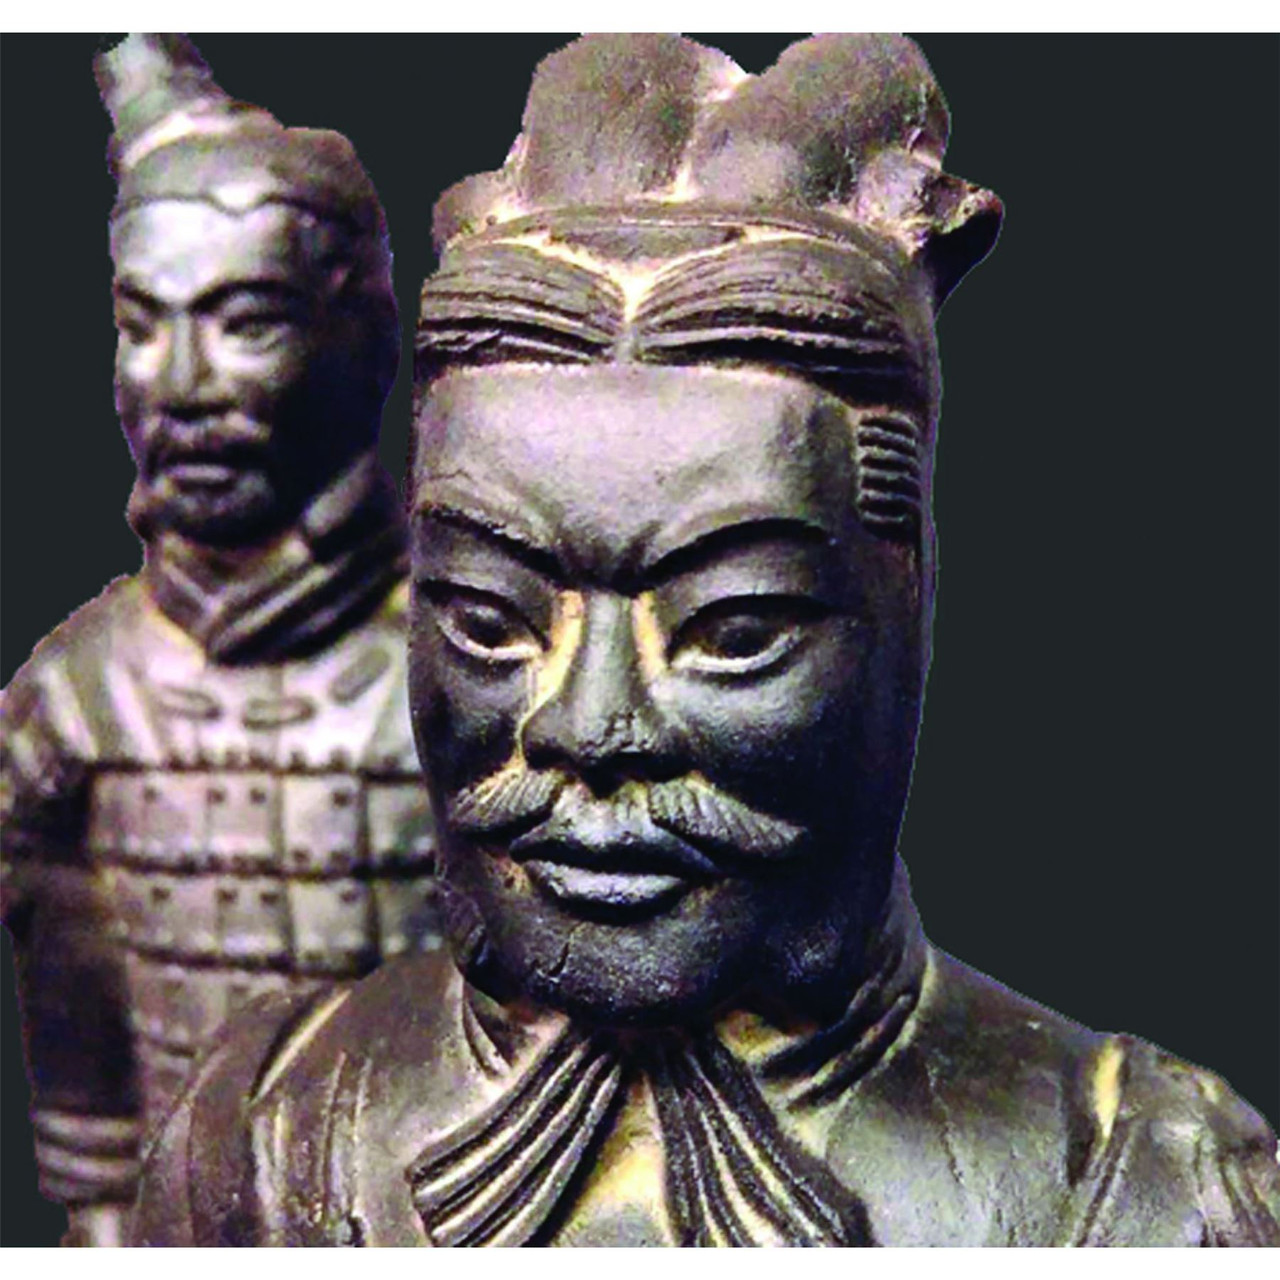 Terracotta Warriors - Set of 5 Chinese Figures - 18 - 21cm Tall - Boxed